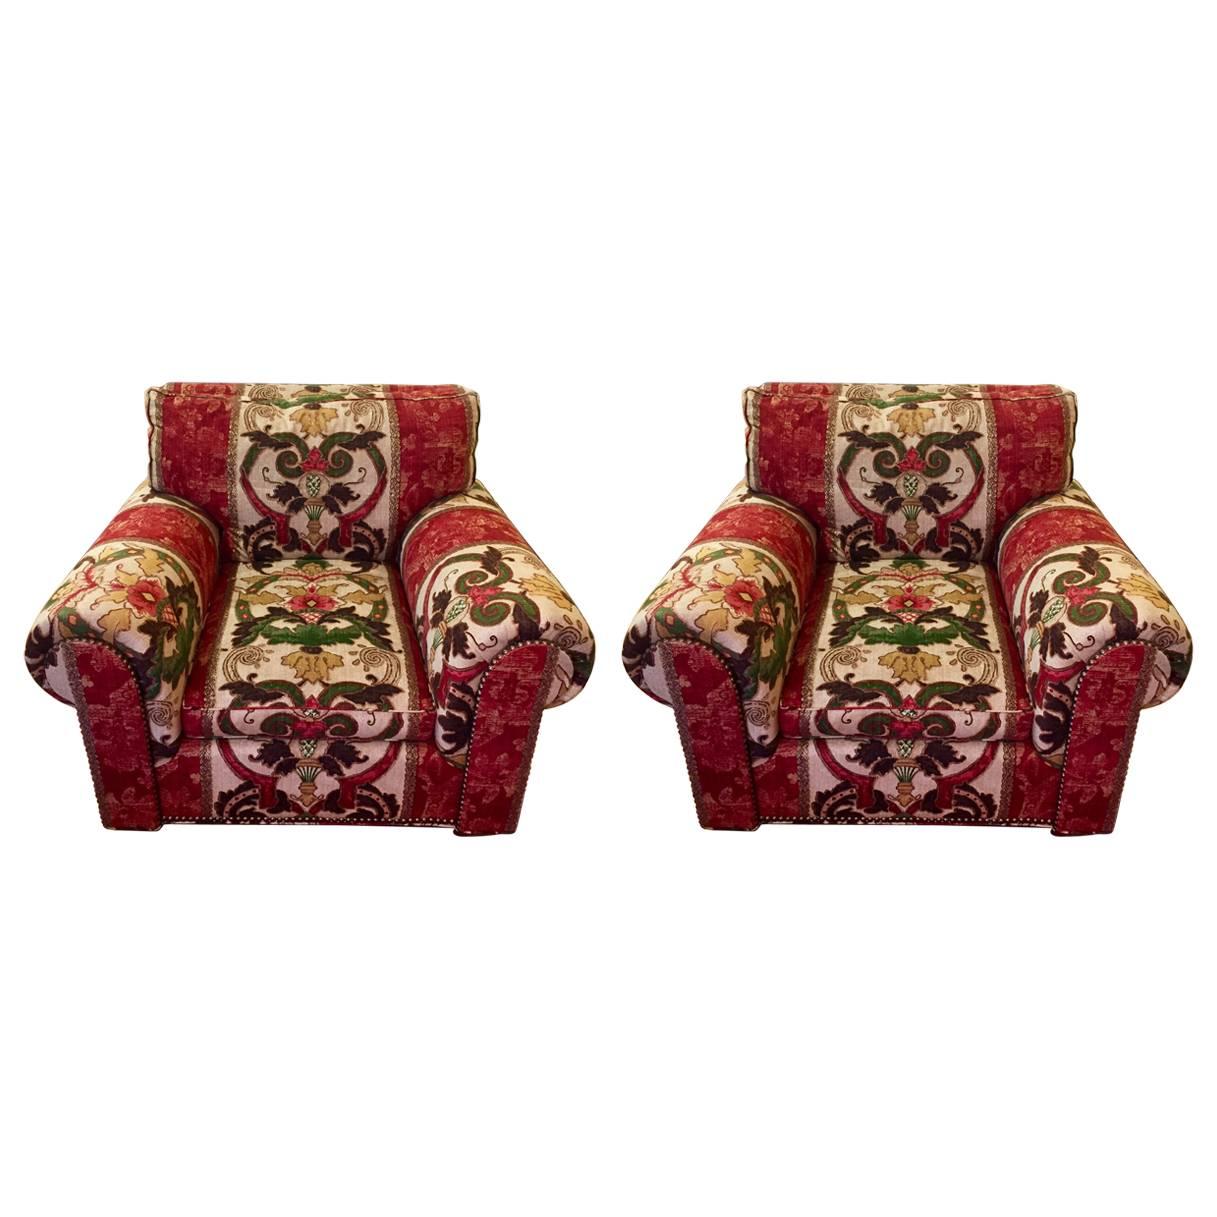 Luxurious Pair of Monumental George Smith Style Club Chairs